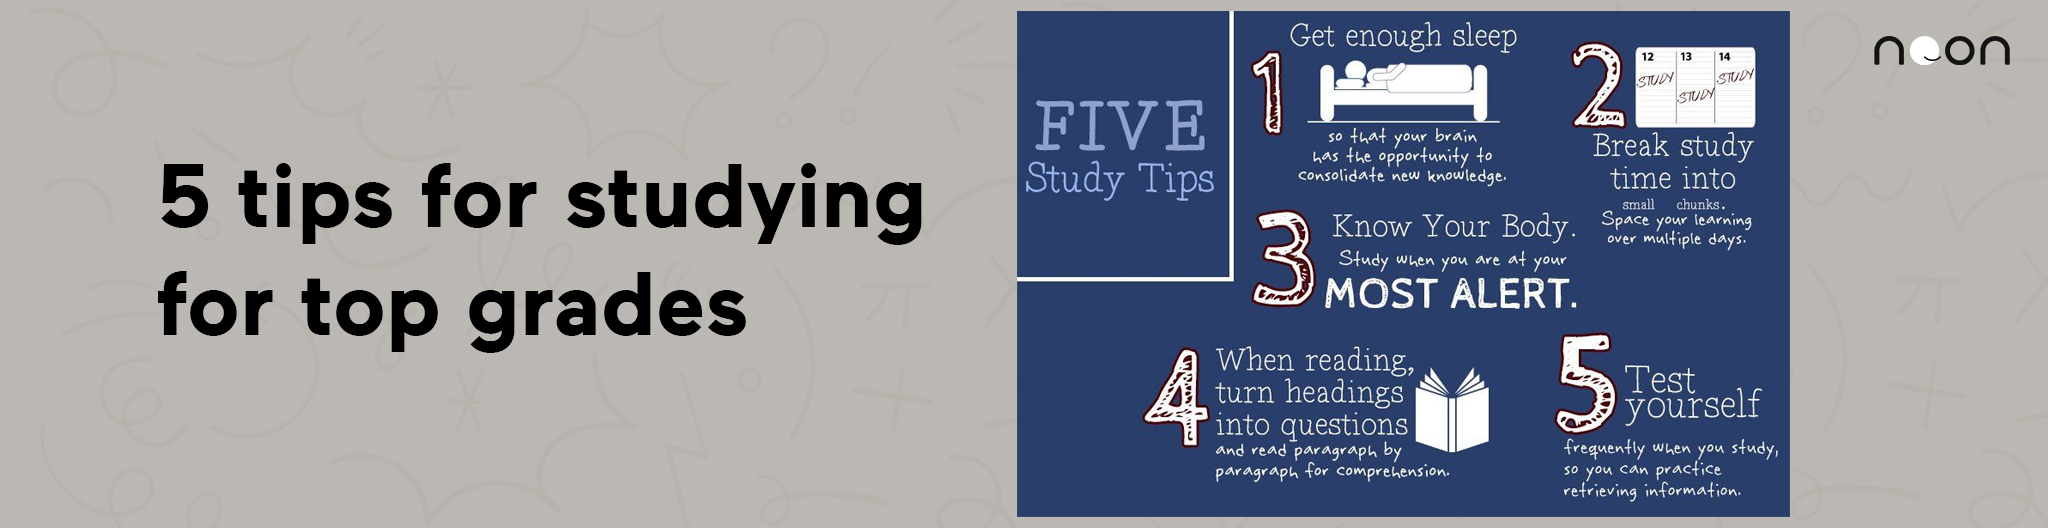 5 tips for studying for top grades